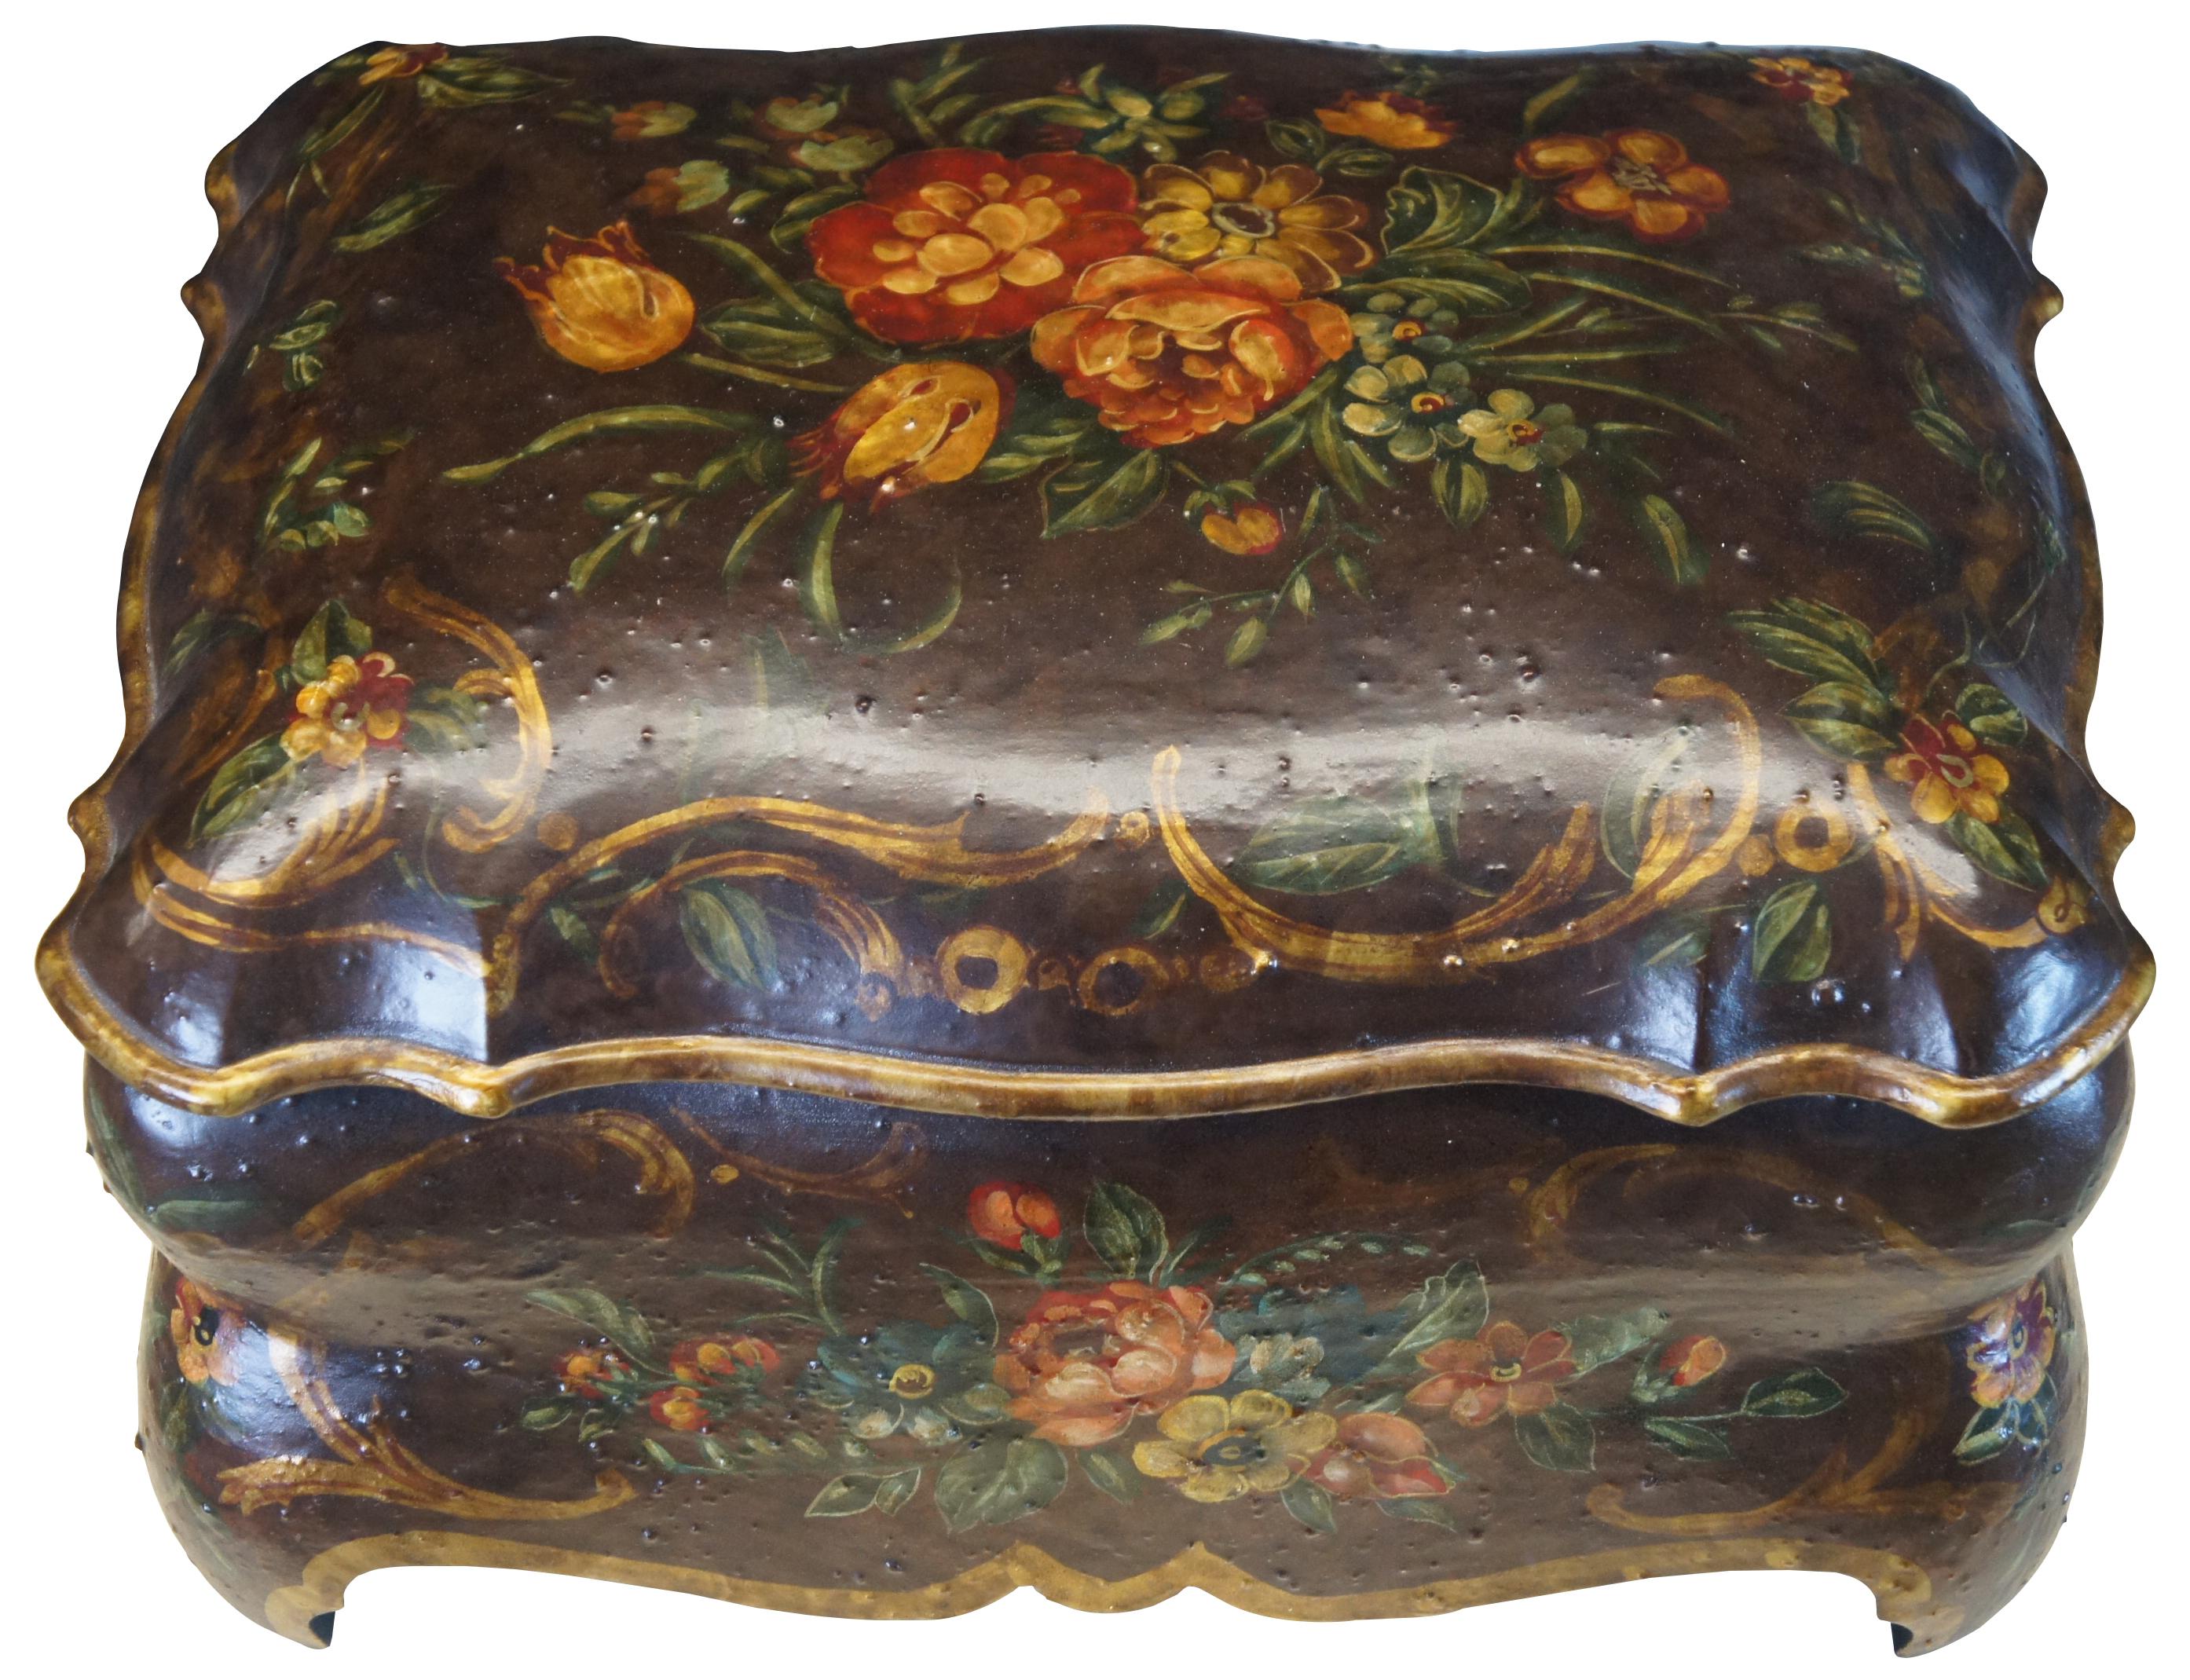 Italian or Baroque Revival chest. Great for decorative use or as a centerpiece or Jewelry Casket. Features a bombe form with hand pianted floral details. Brown with gold trim. Measure: 16